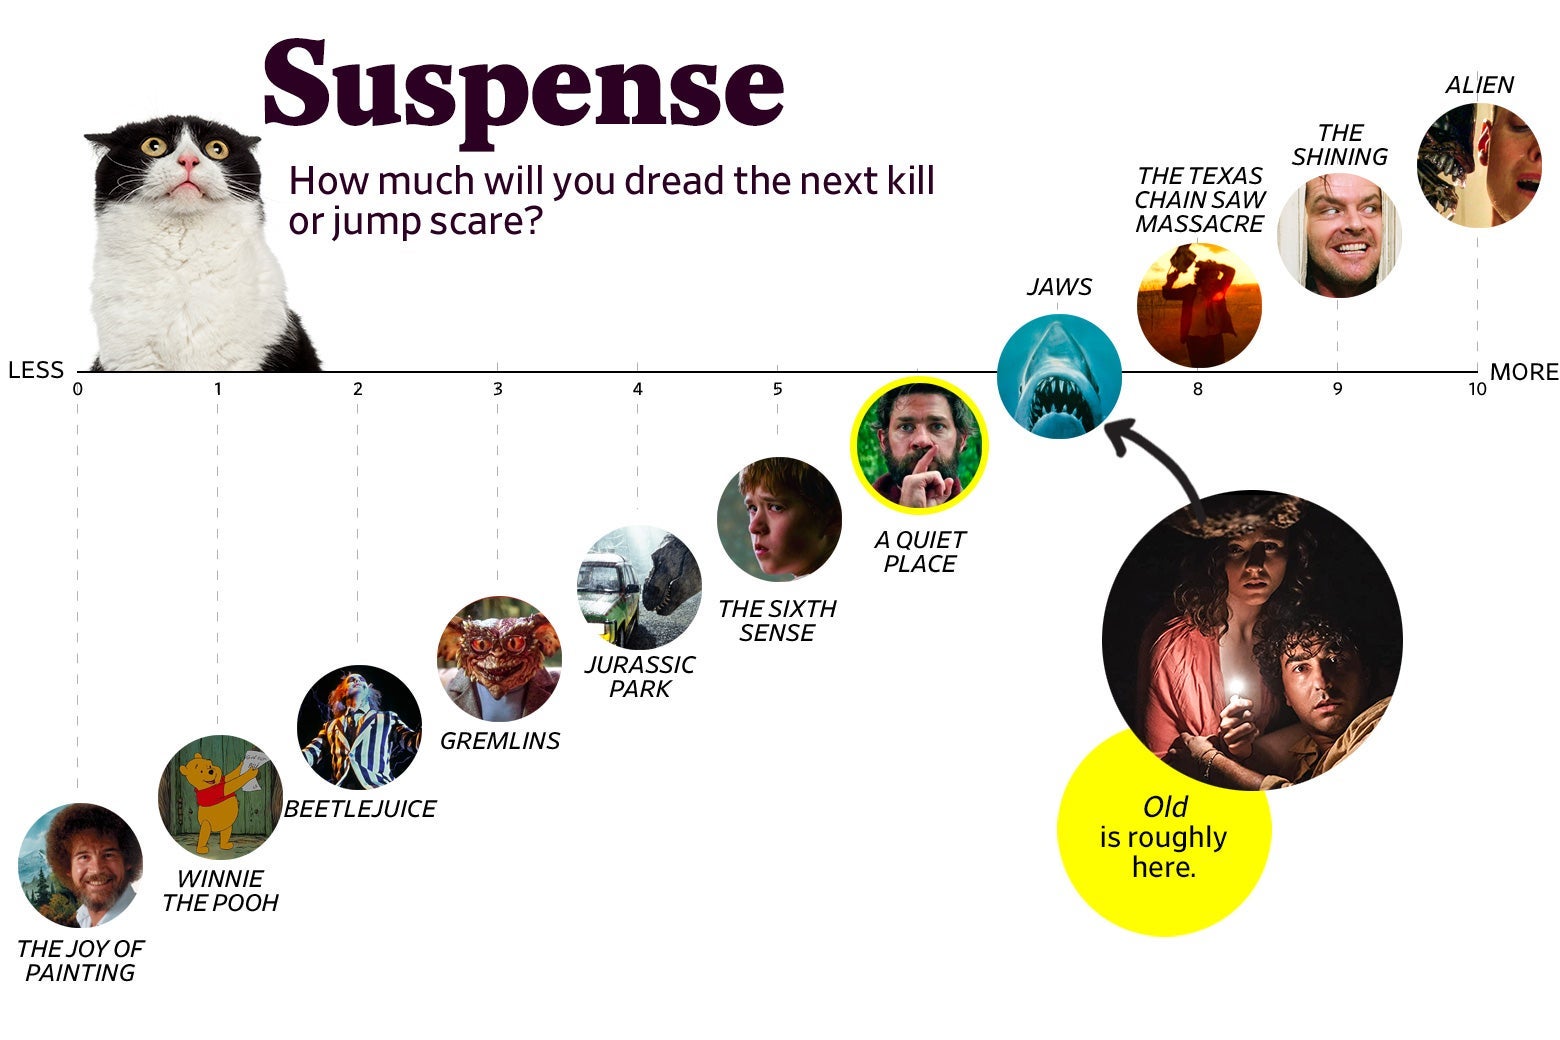 A chart titled “Suspense: How much will you dread the next kill or jump scare?” shows that Old ranks a 7 in suspense, roughly the same as Jaws, and two points higher than The Sixth Sense. The scale ranges from The Joy of Painting (0) to Alien (10). 